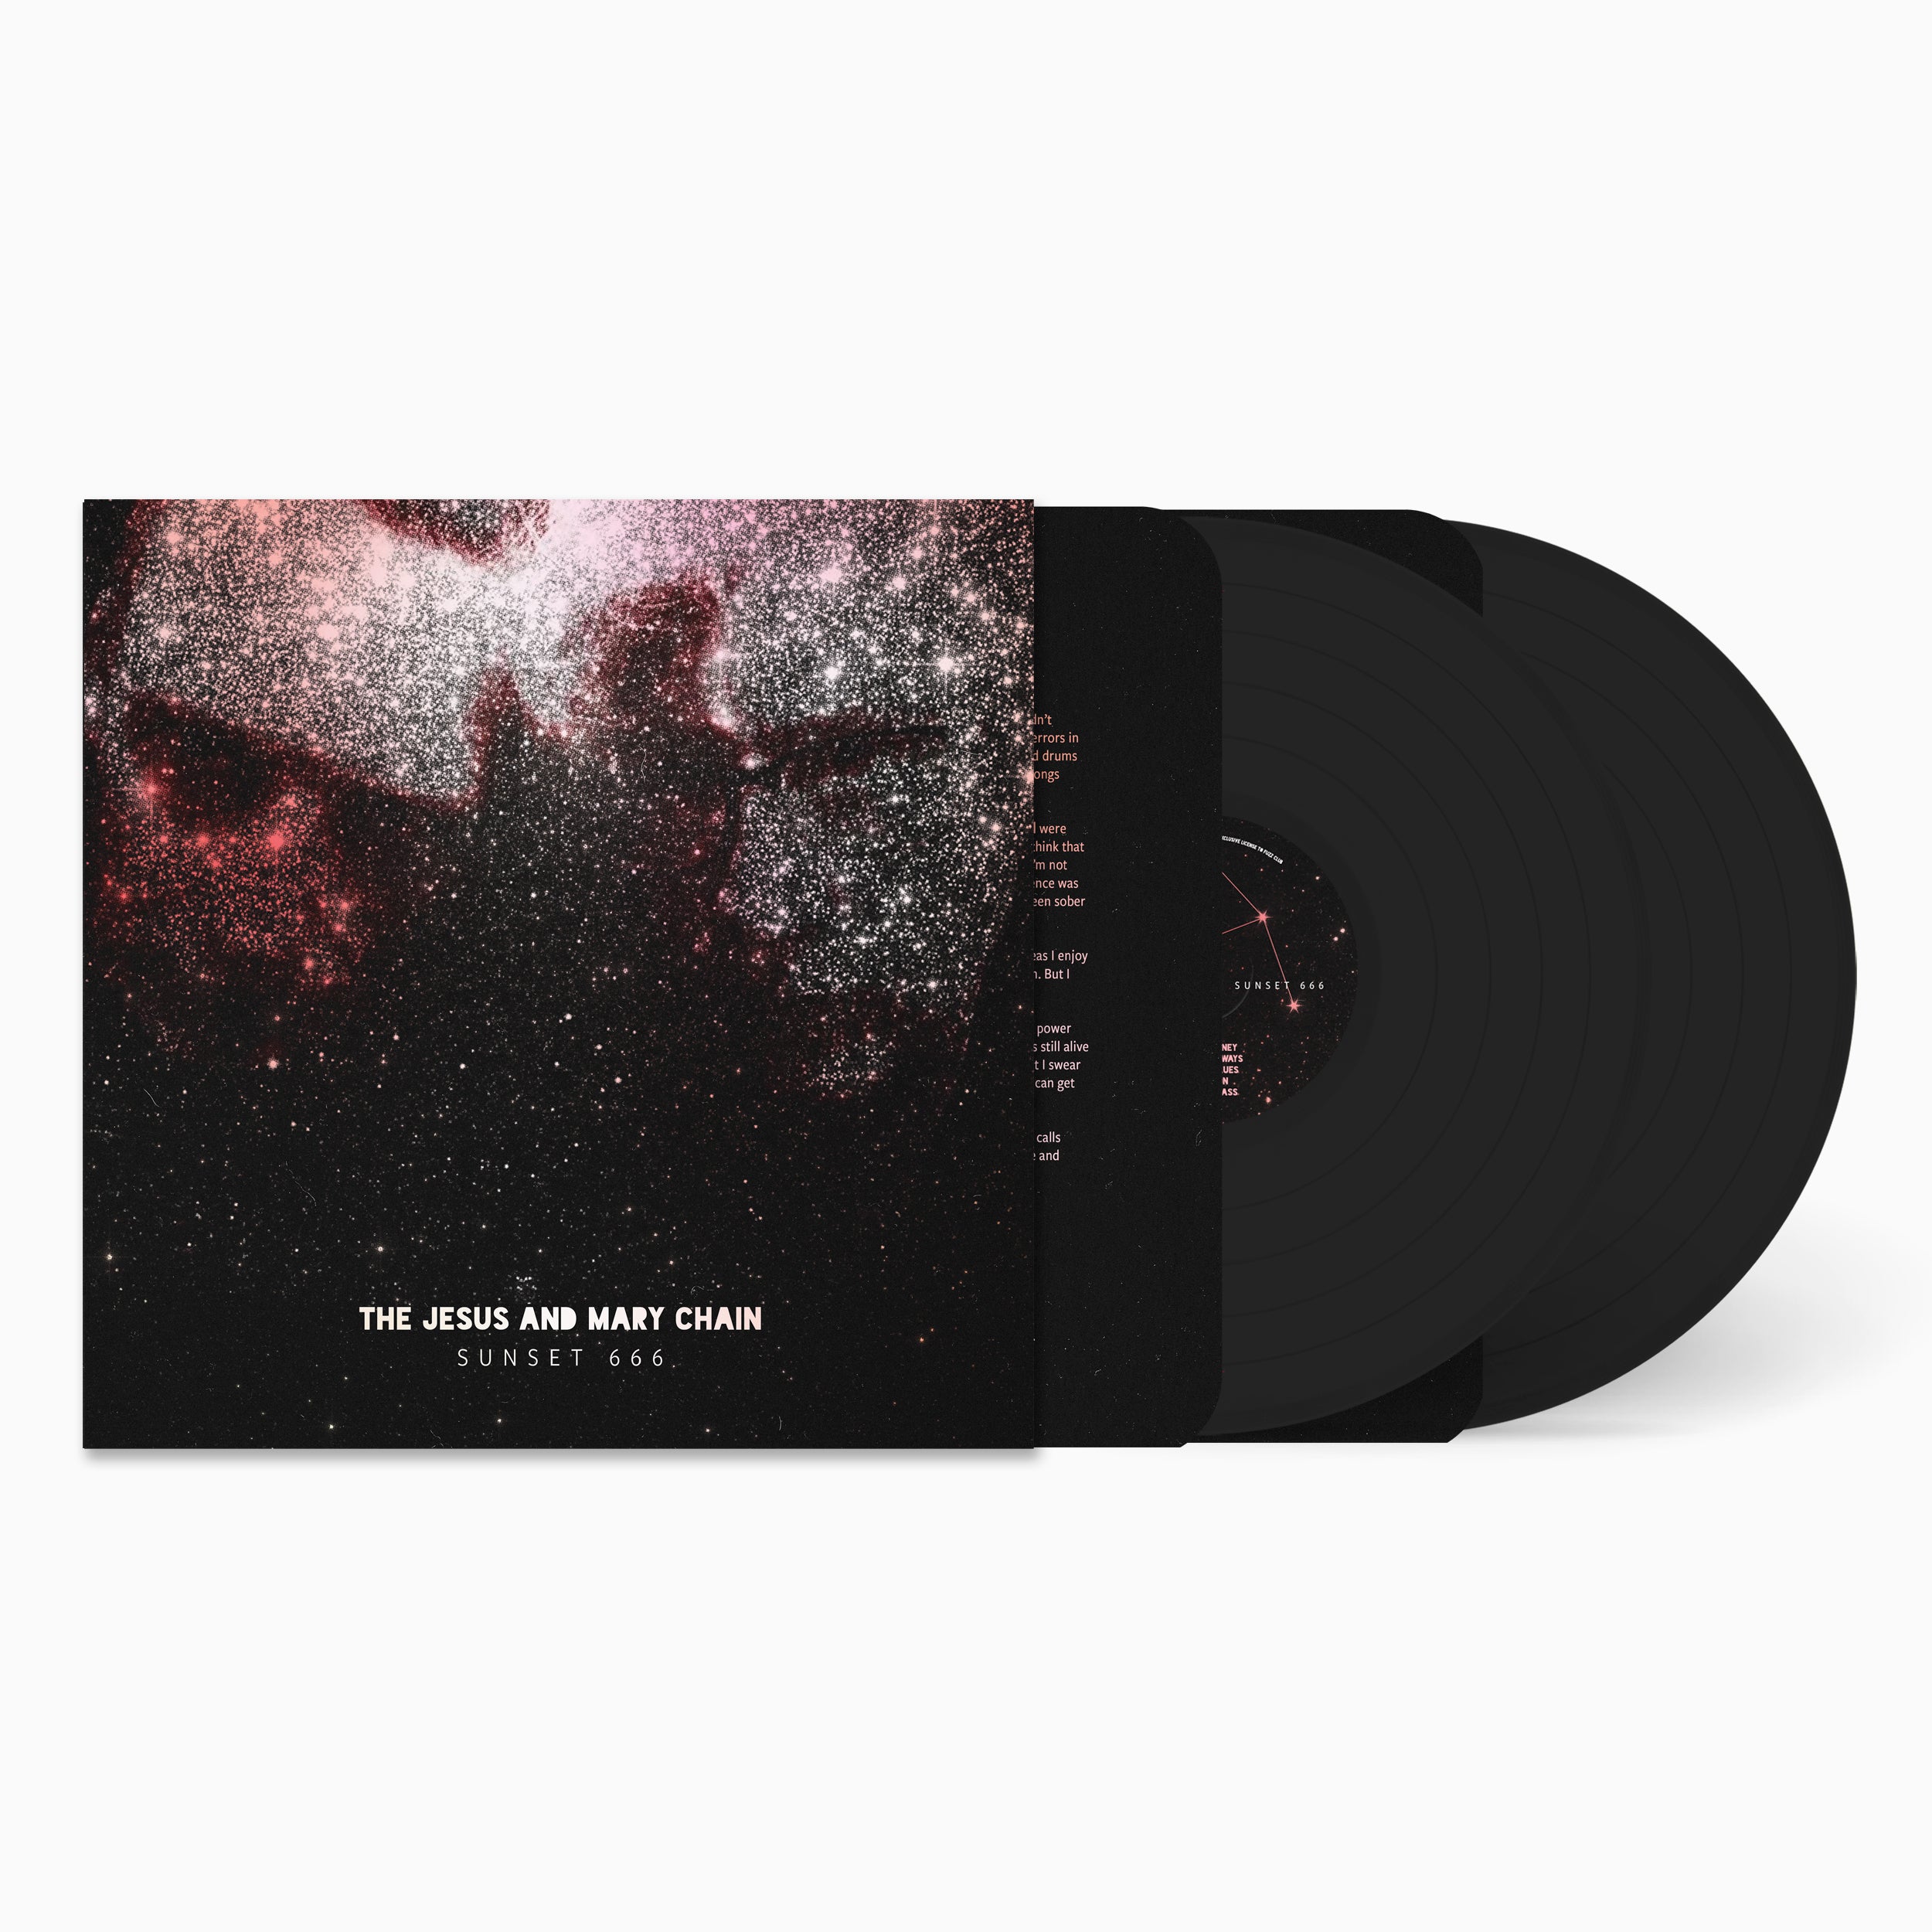 The Jesus and Mary Chain - Sunset 666 (Live at Hollywood Palladium): Vinyl 2LP